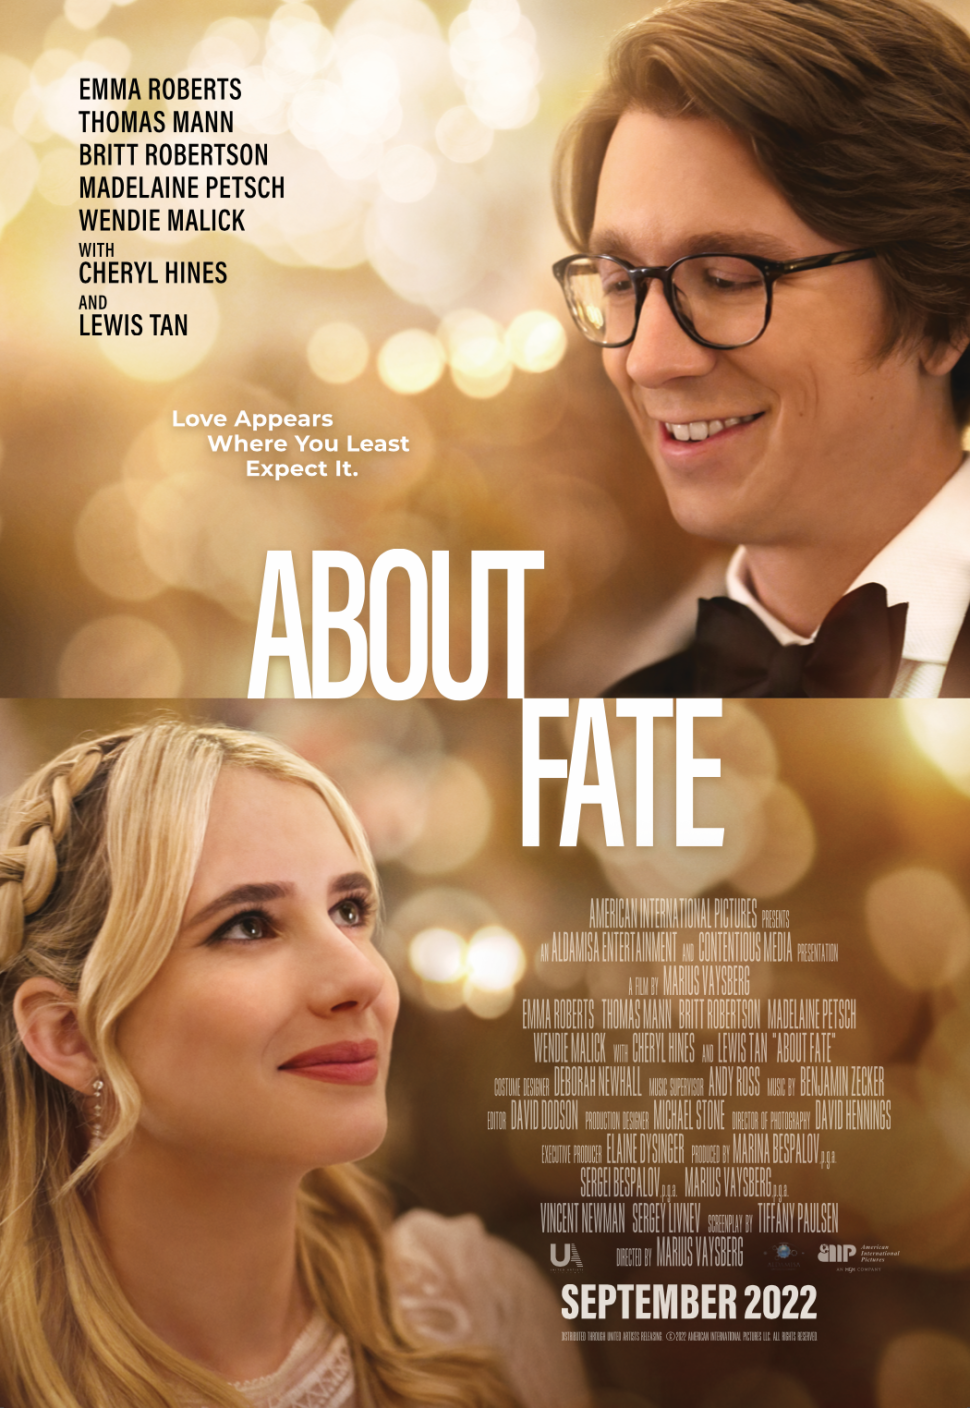 about fate poster emma roberts thomas mann